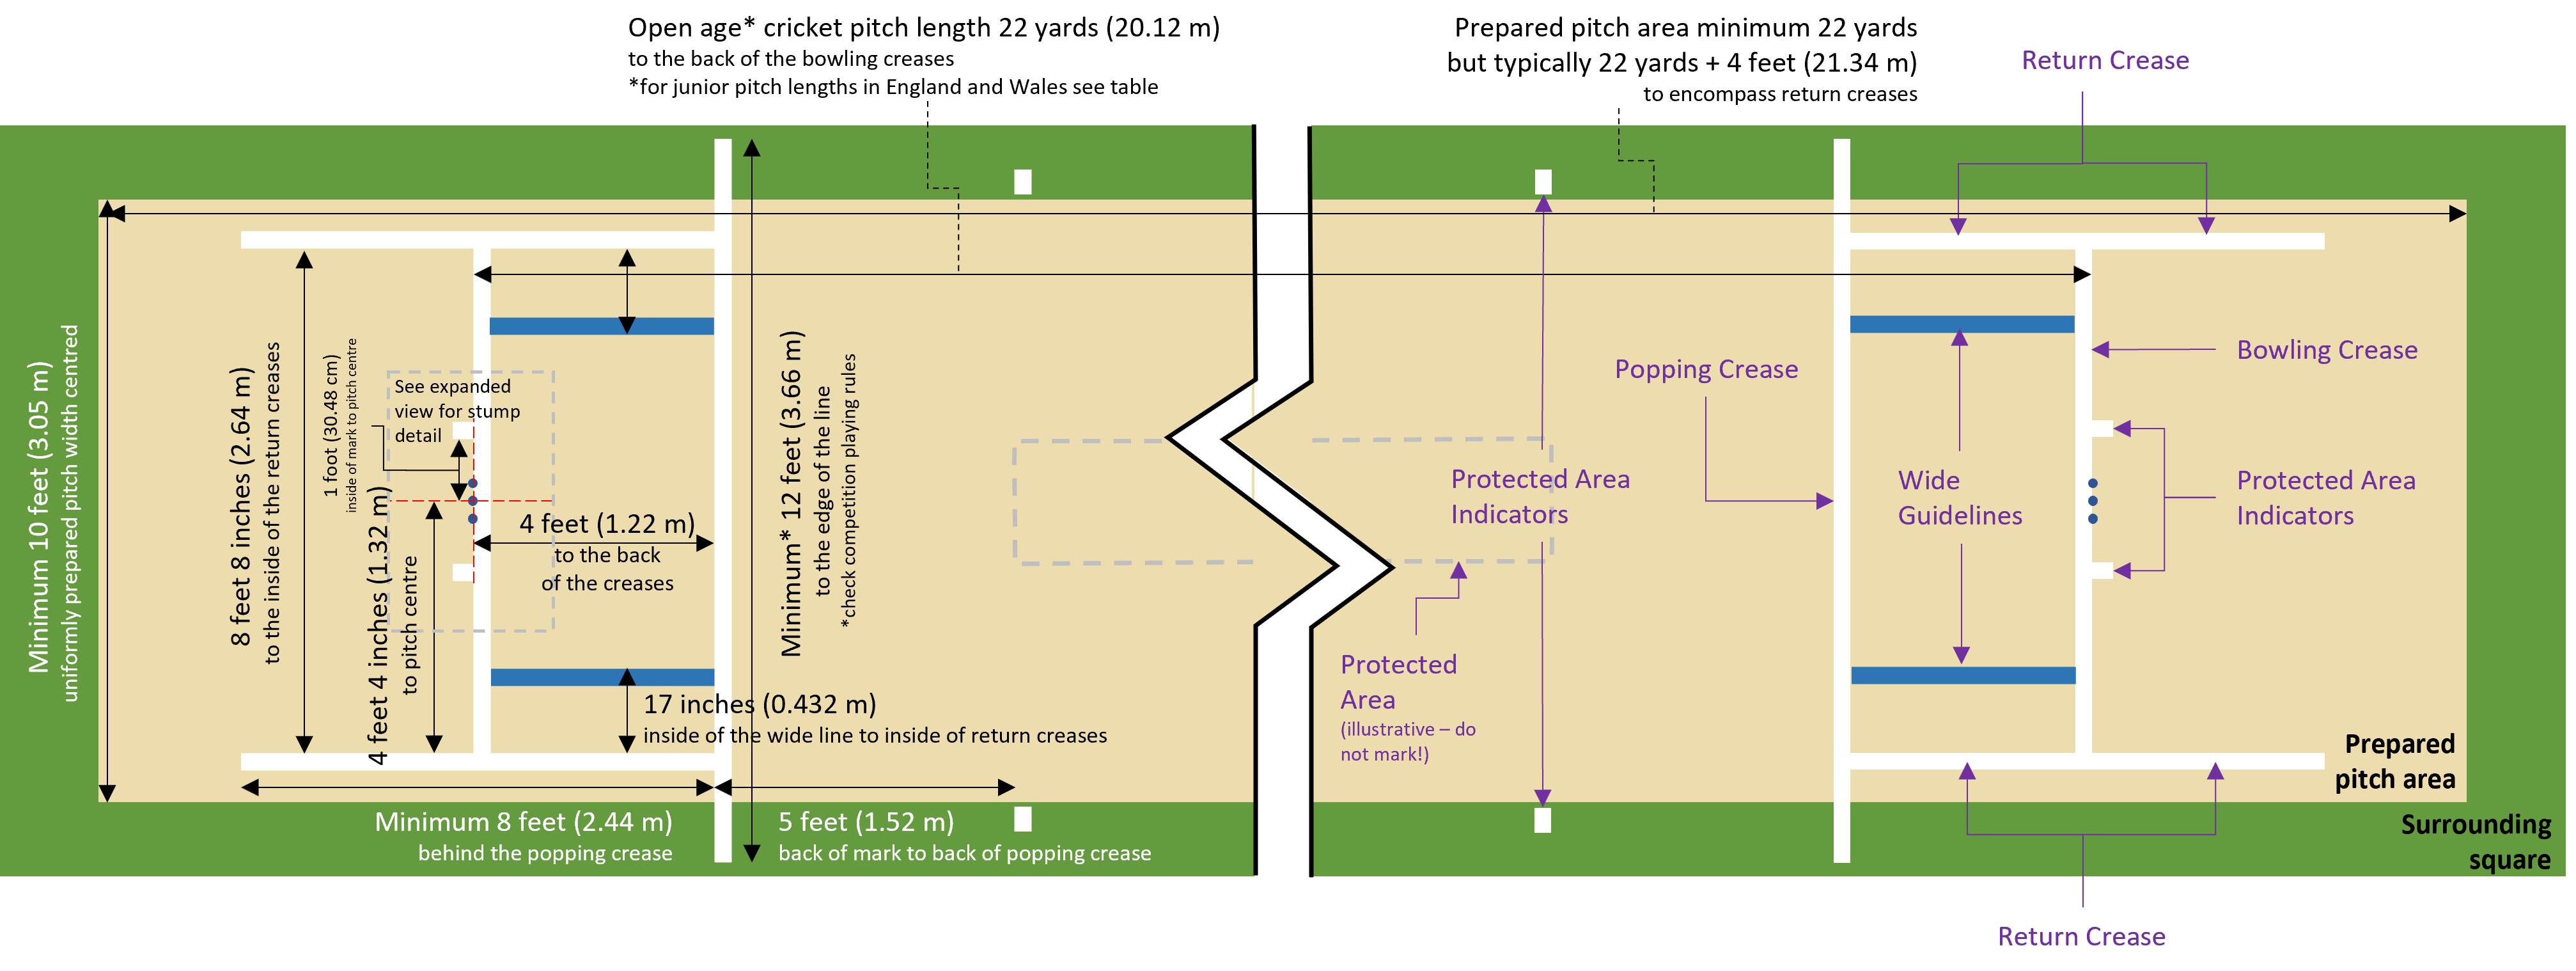 Image showing the line markings of a cricket pitch with critical spacing and dimensions